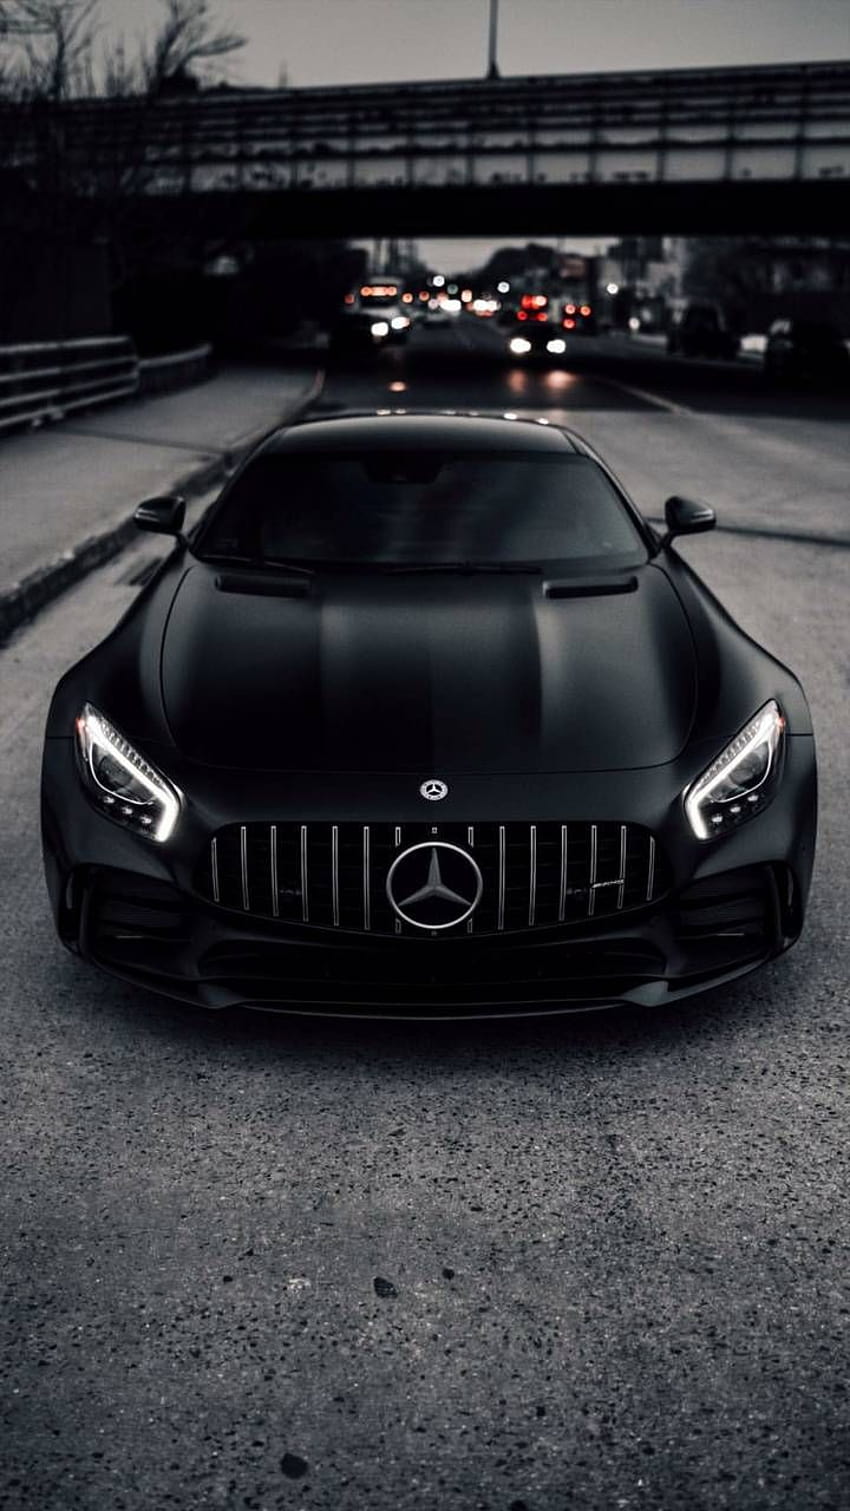 Stealth AMG GTS by AbdxllahM, mercedes gts iphone HD phone wallpaper